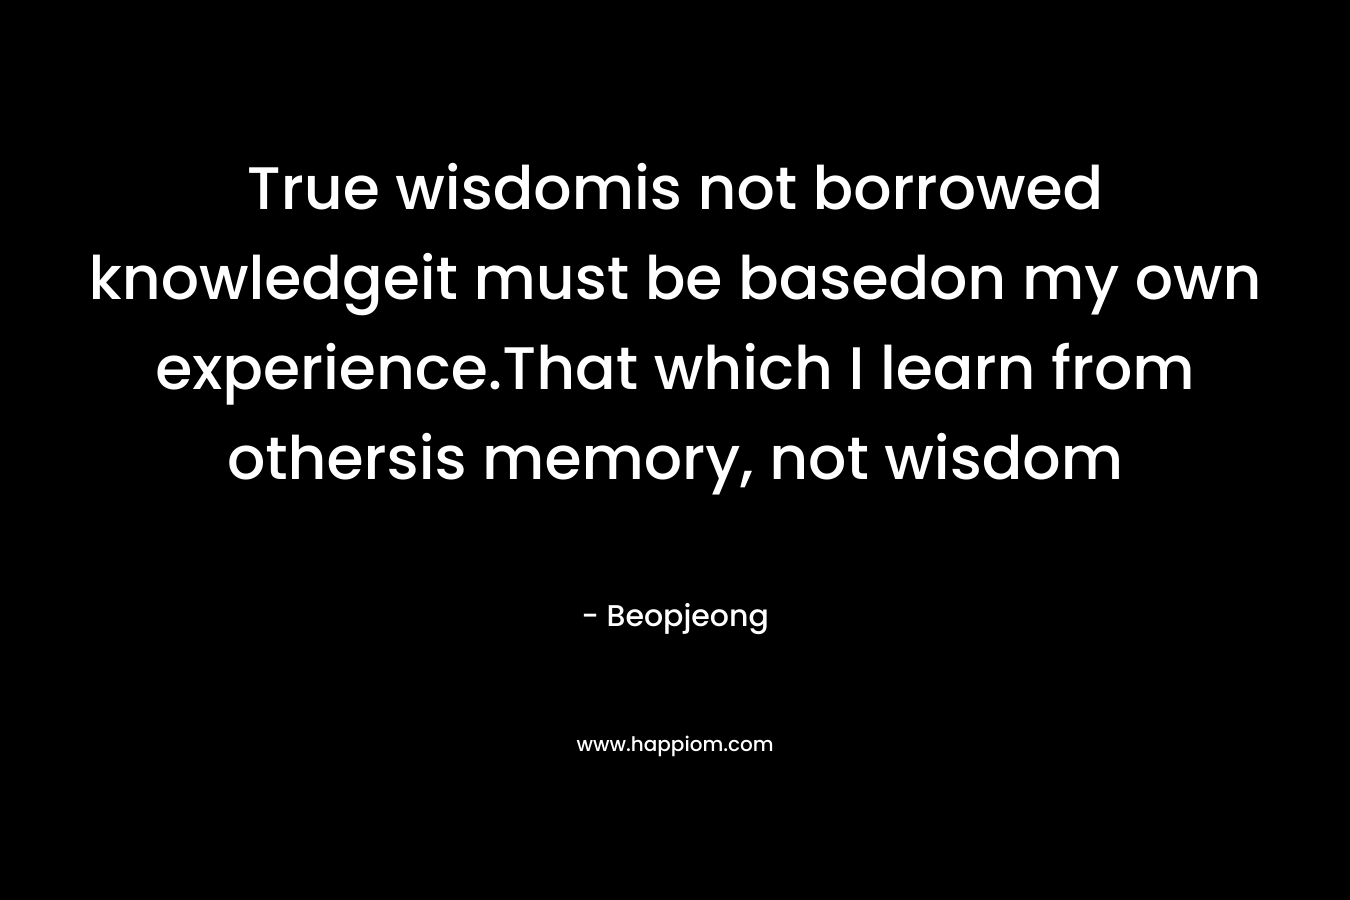 True wisdomis not borrowed knowledgeit must be basedon my own experience.That which I learn from othersis memory, not wisdom – Beopjeong